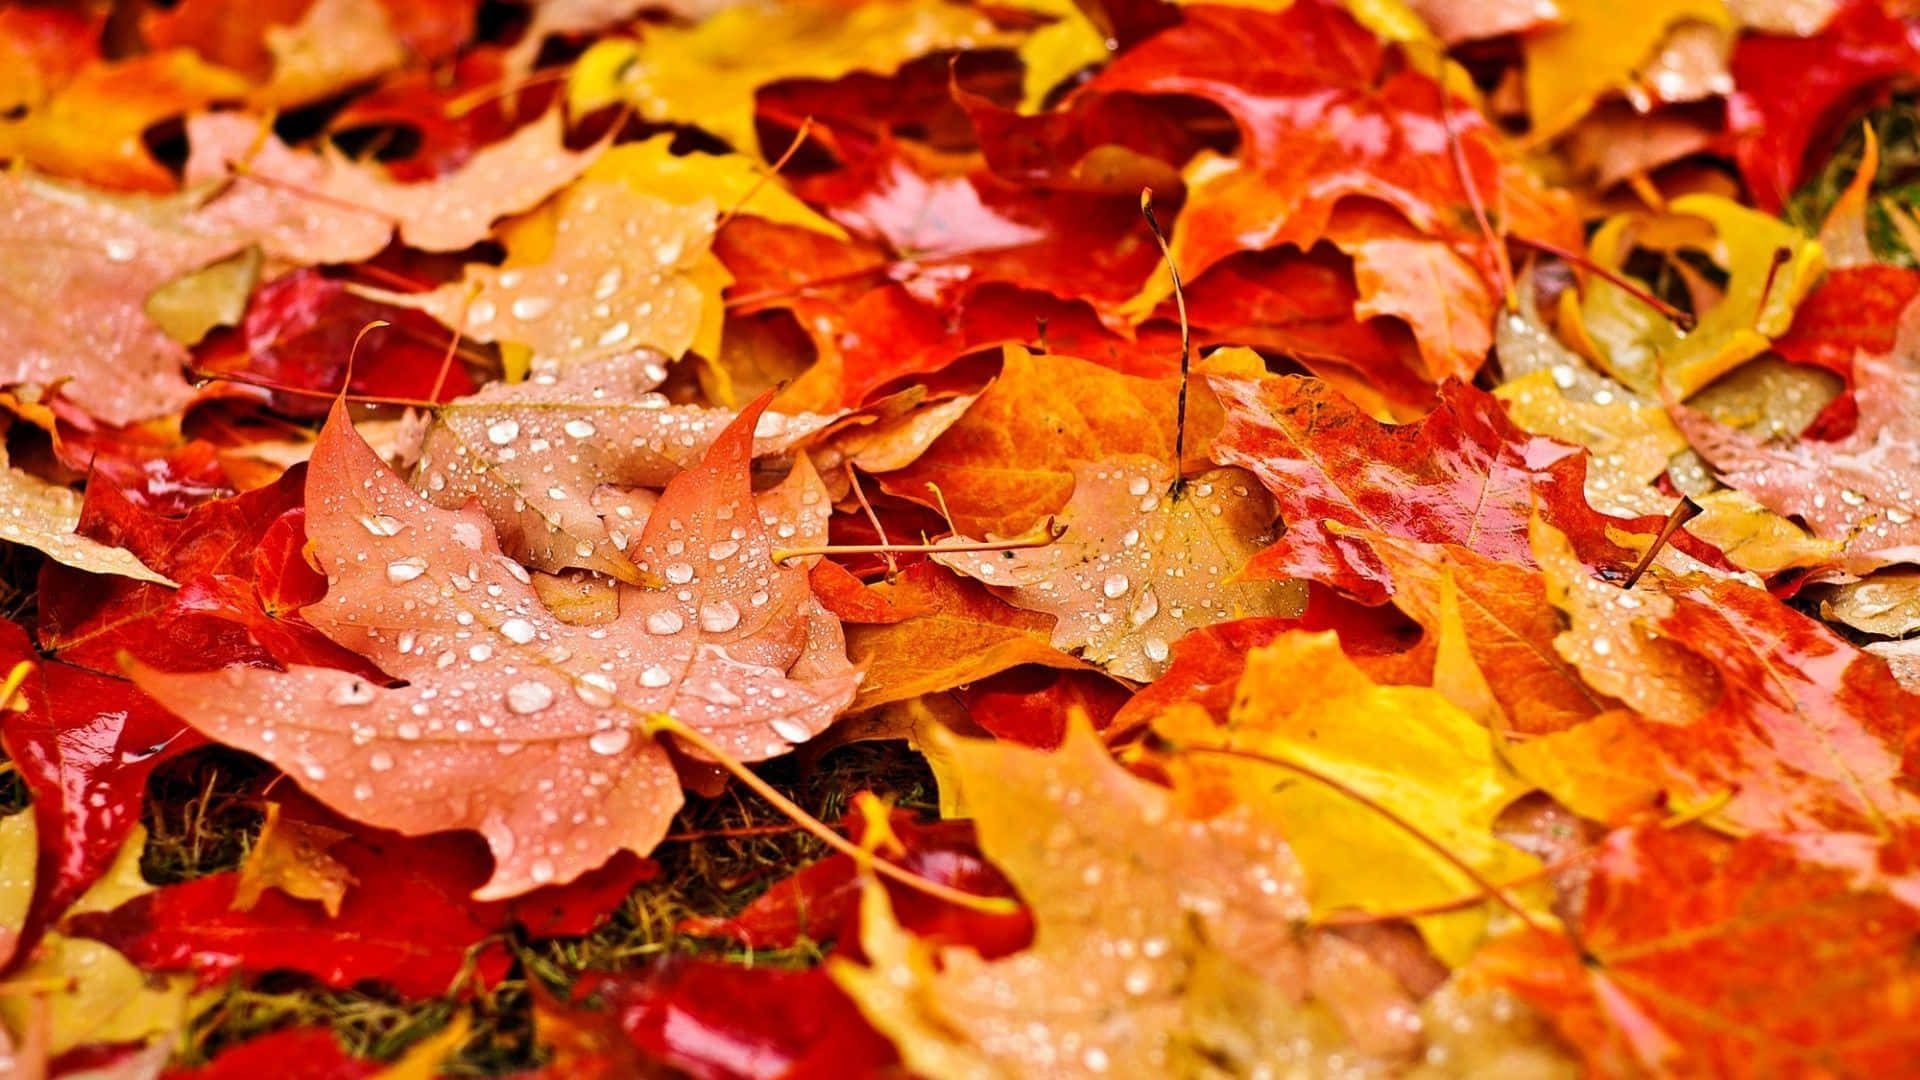 Autumn Leaves With Water Droplets On Them